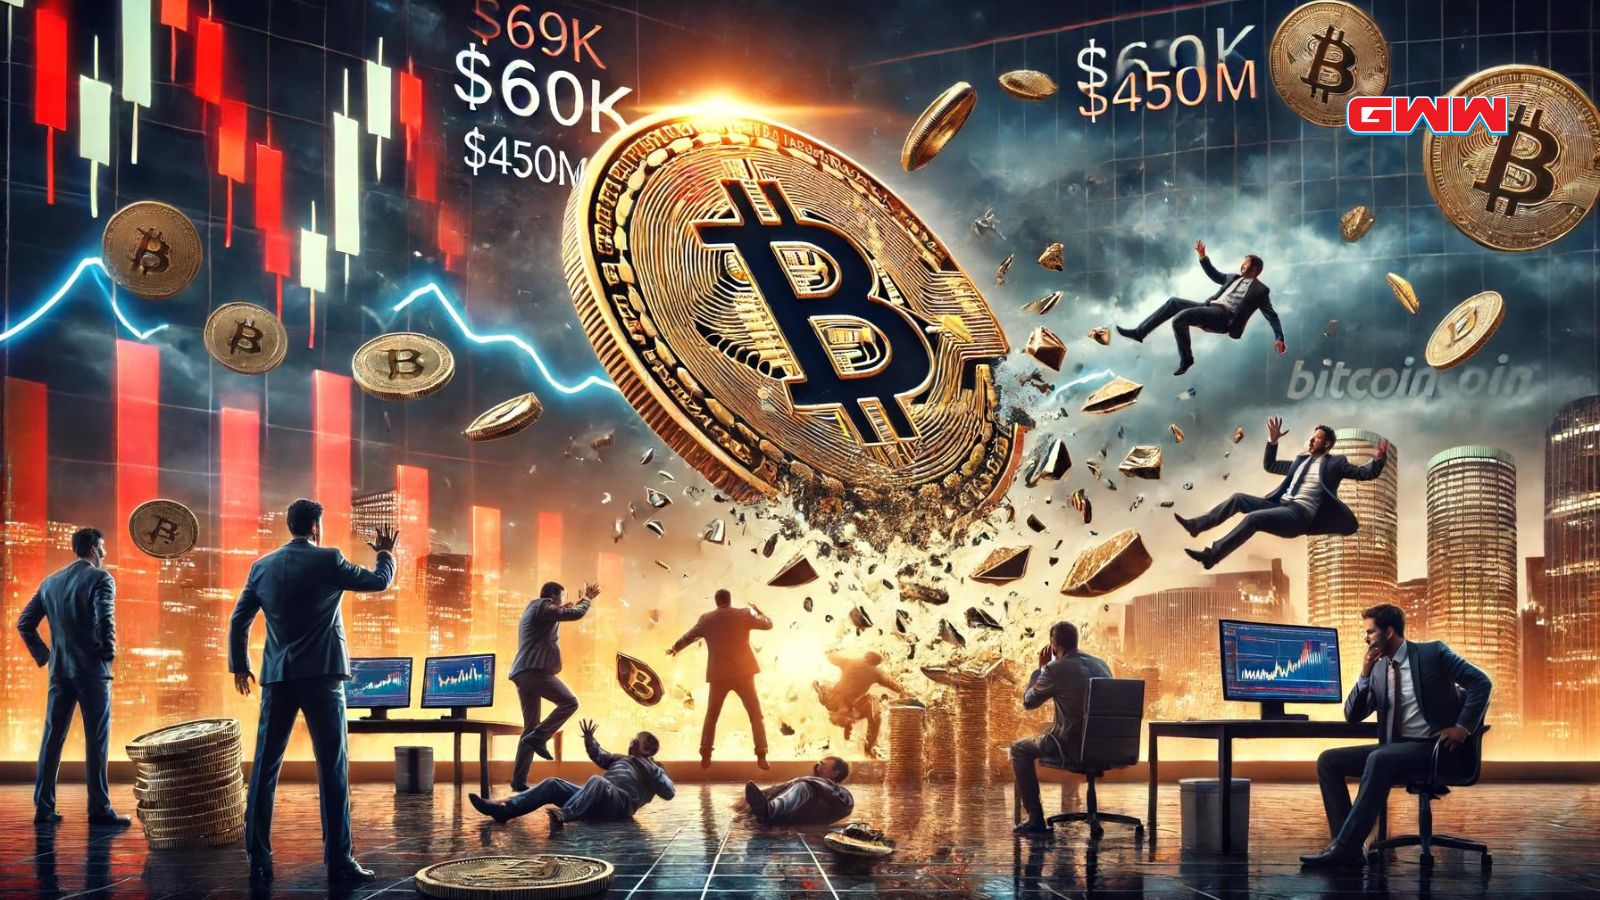 Bitcoin volatility with stock market crash, businessmen reacting to changes